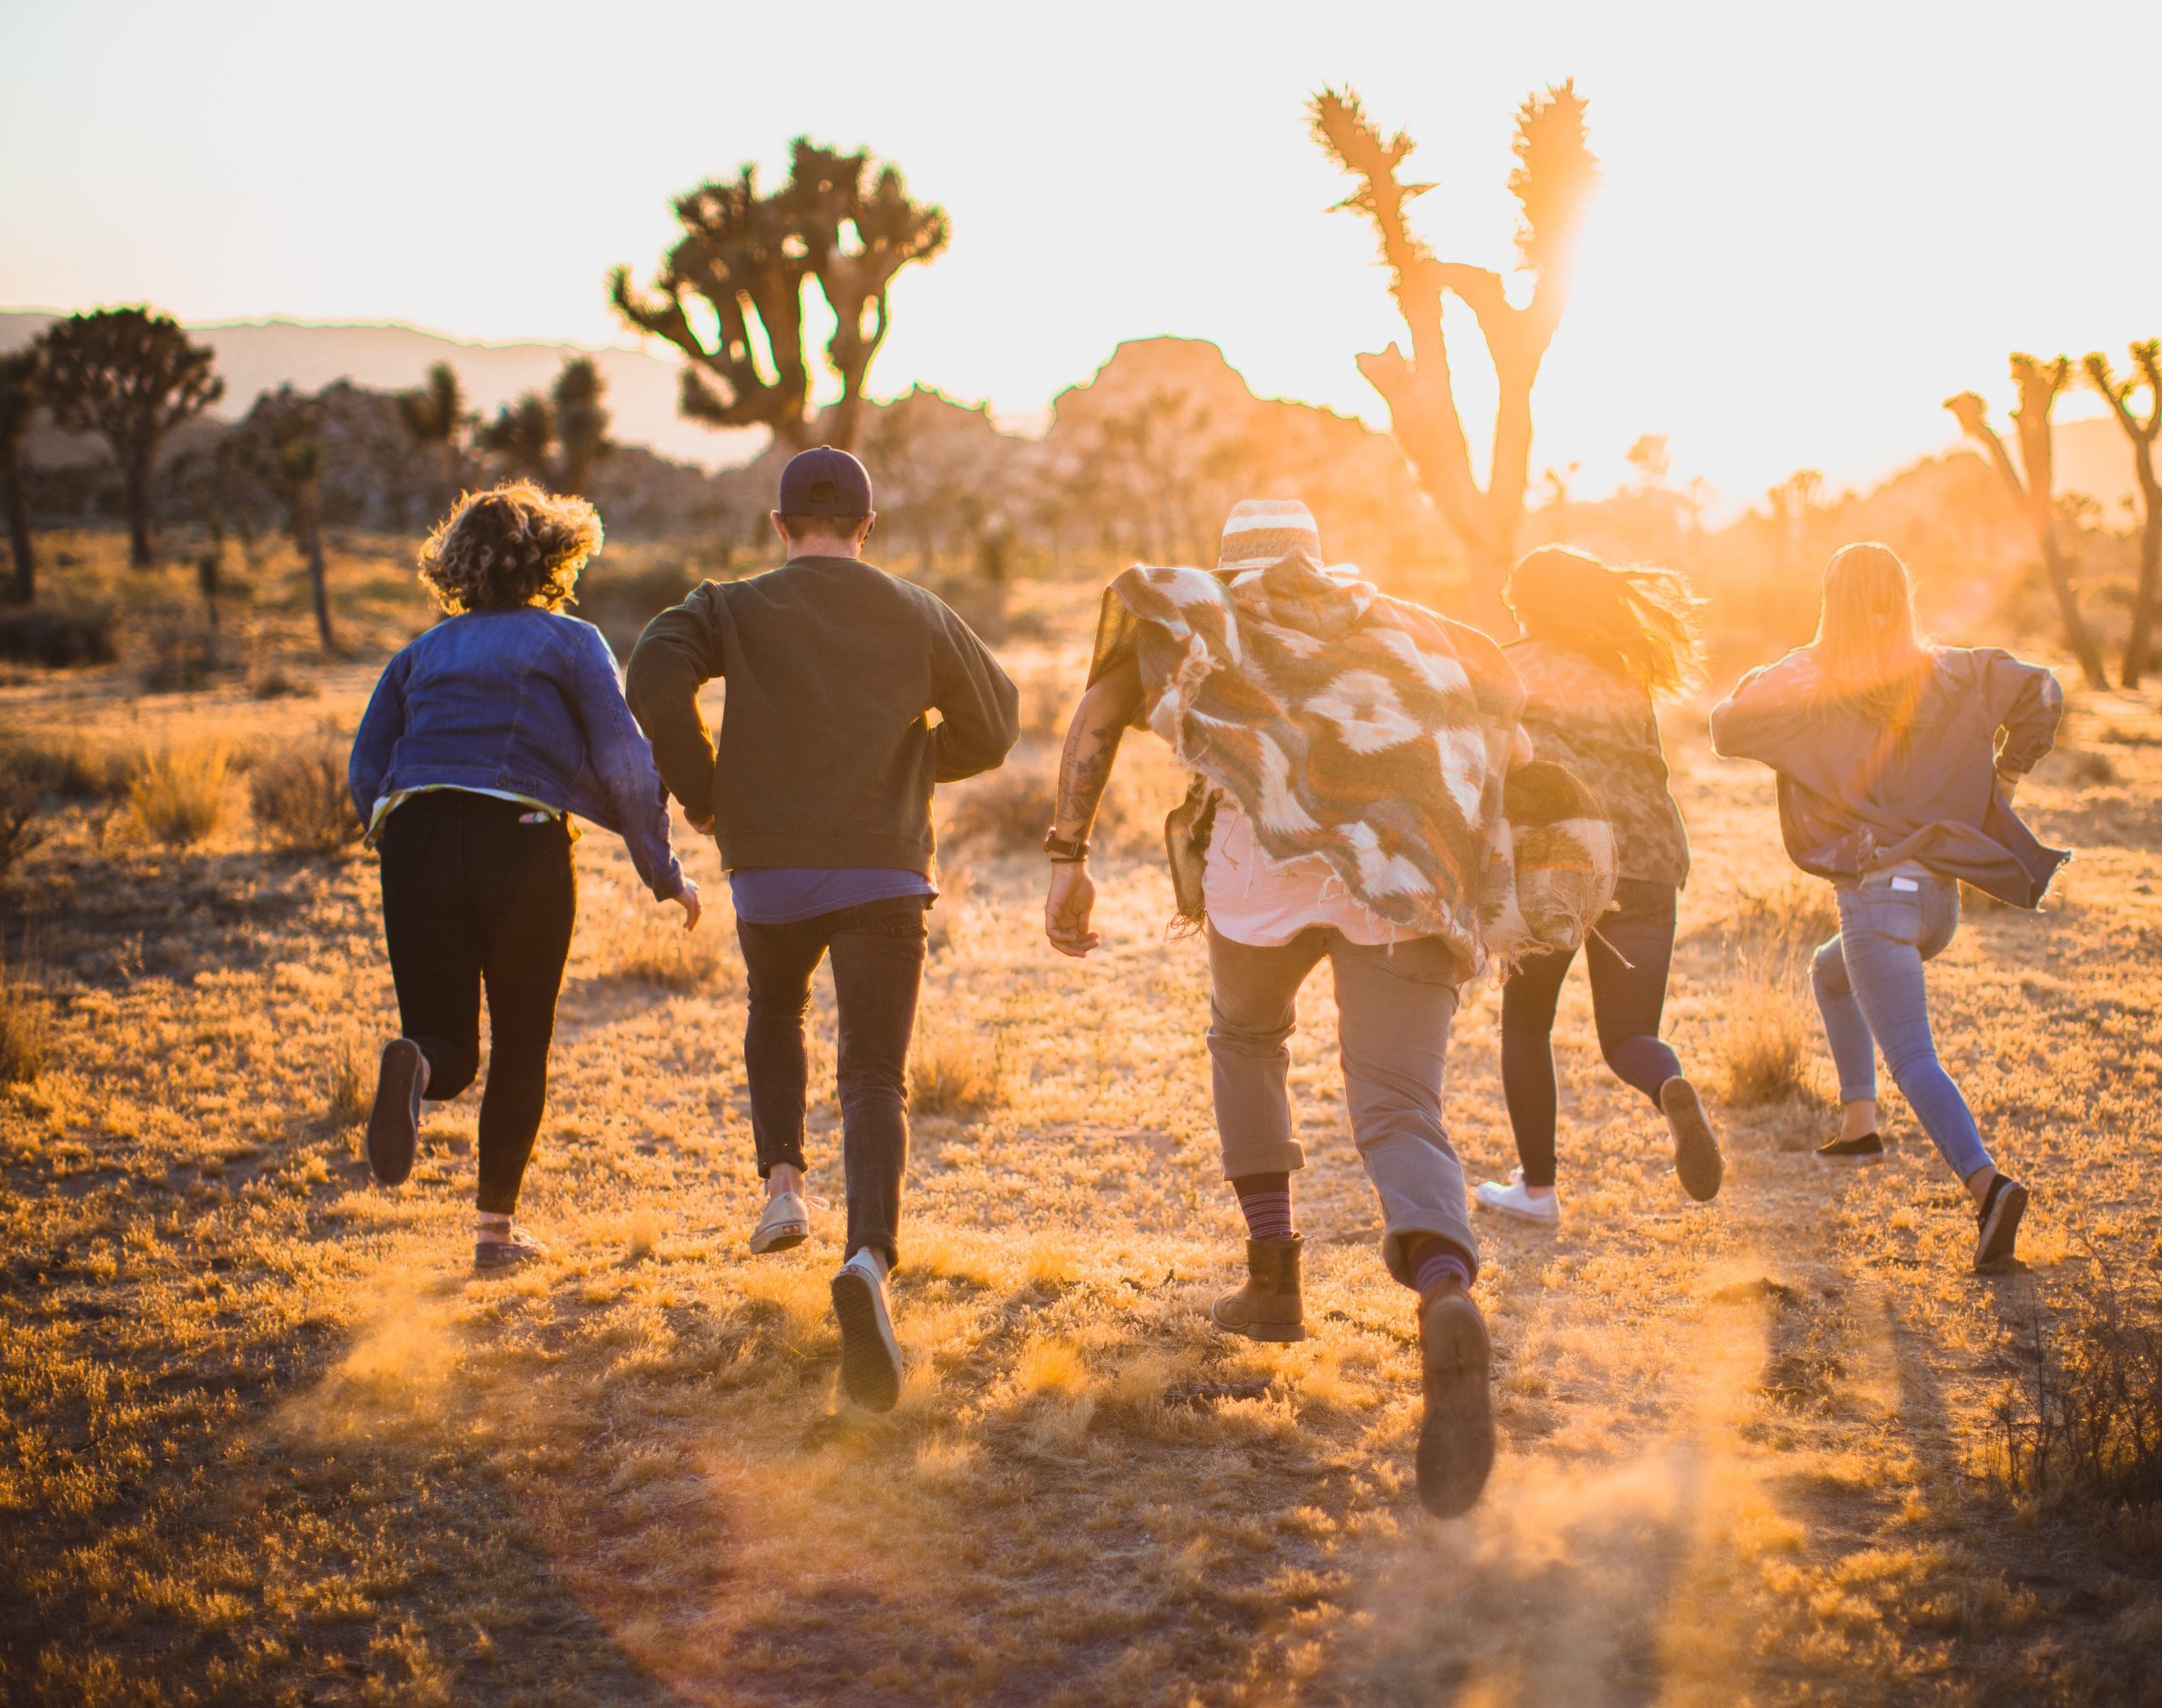 photo showing young people running towards the sun